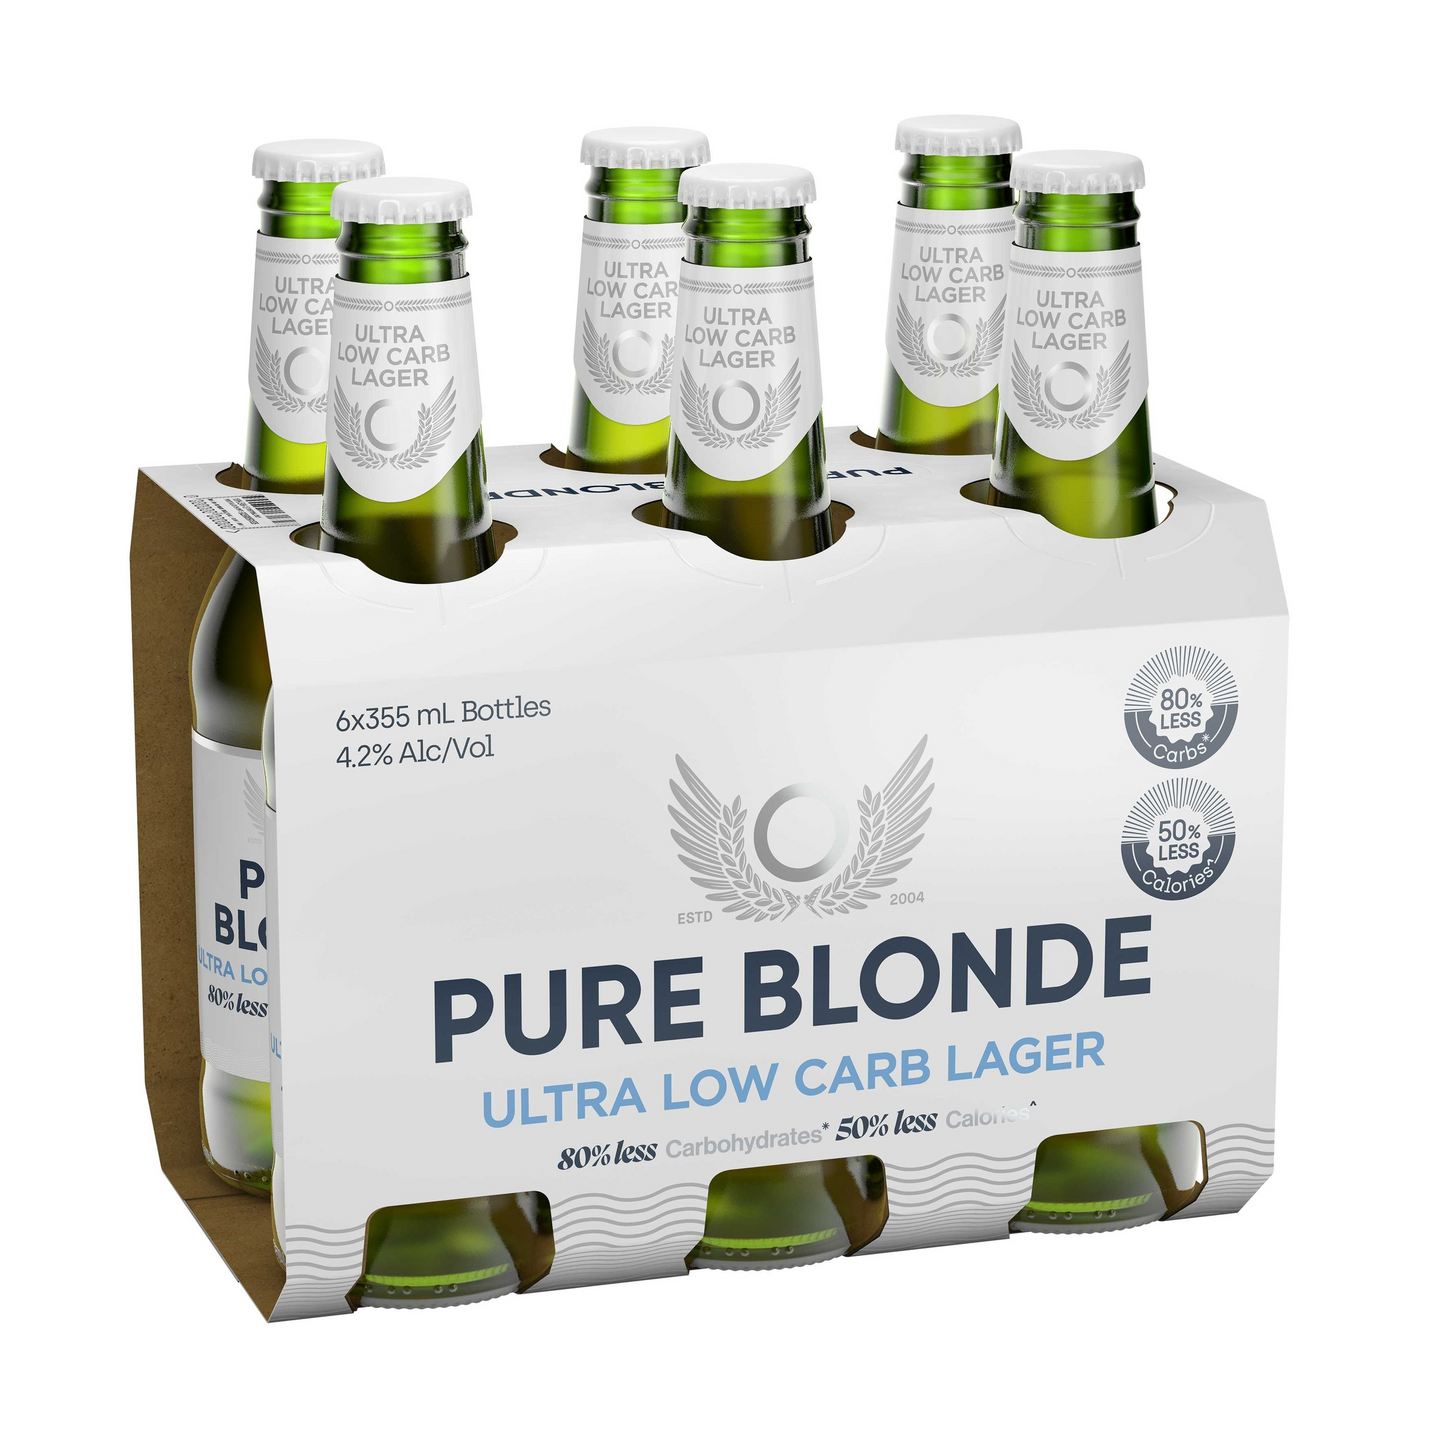 Pure Blonde Ultra Low Carb Lager 6 x 355mL Bottles